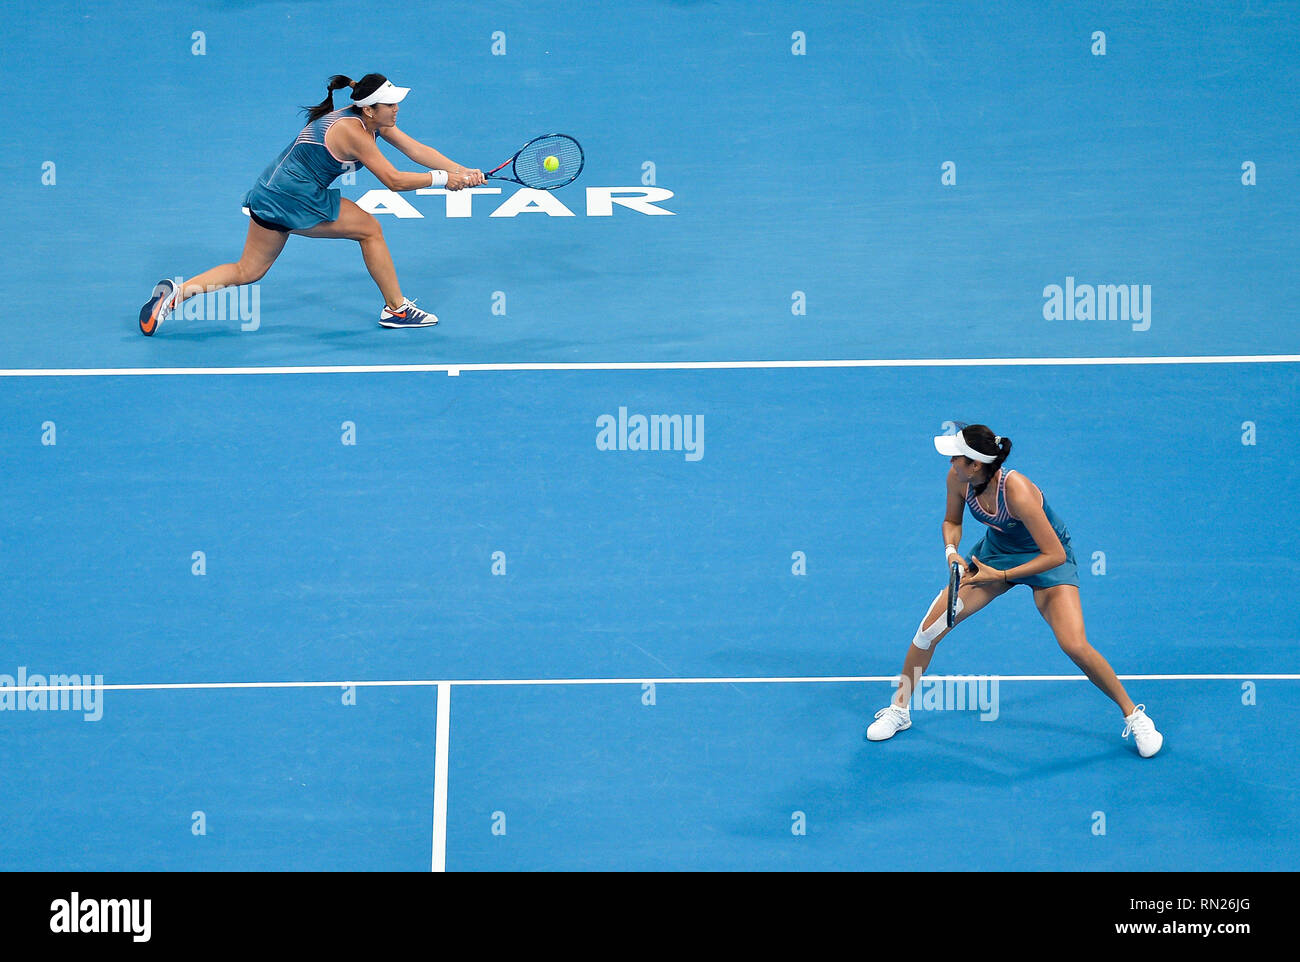 Doha, Qatar. 16th Feb, 2019. Latisha Chan (L) and Hao-Ching Chan of Chinese Taipei compete during the doubles final against Demi Schuurs of the Nederlands and Anna-Lena Groenefeld of Germany at the 2019 WTA Qatar Open in Doha, Qatar, Feb. 16, 2019. Credit: Nikku/Xinhua/Alamy Live News Stock Photo